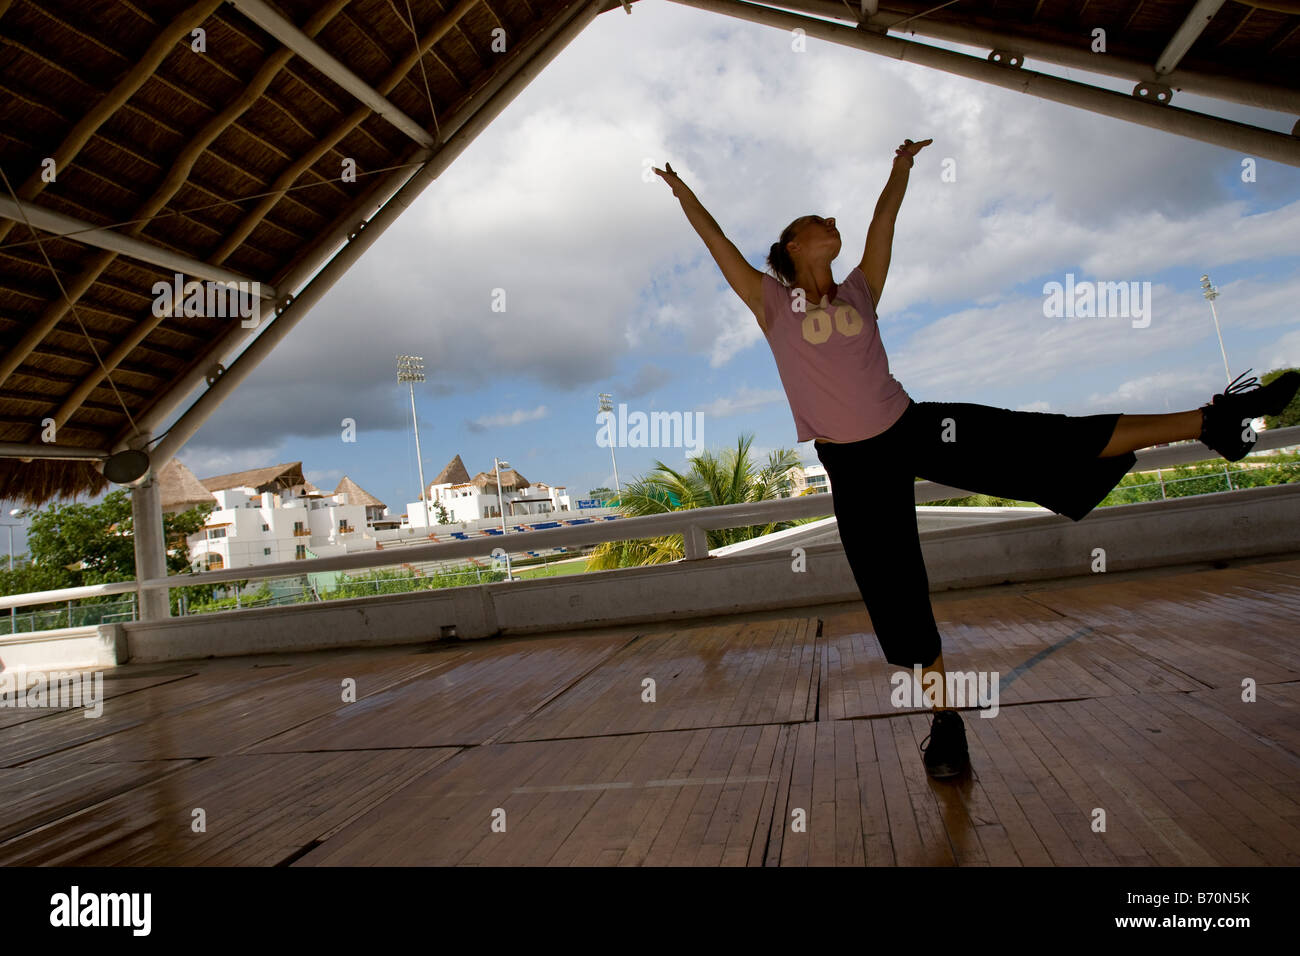 Salsa Dancers practising under a canopy in Playa Del Carmen Mexico Stock Photo